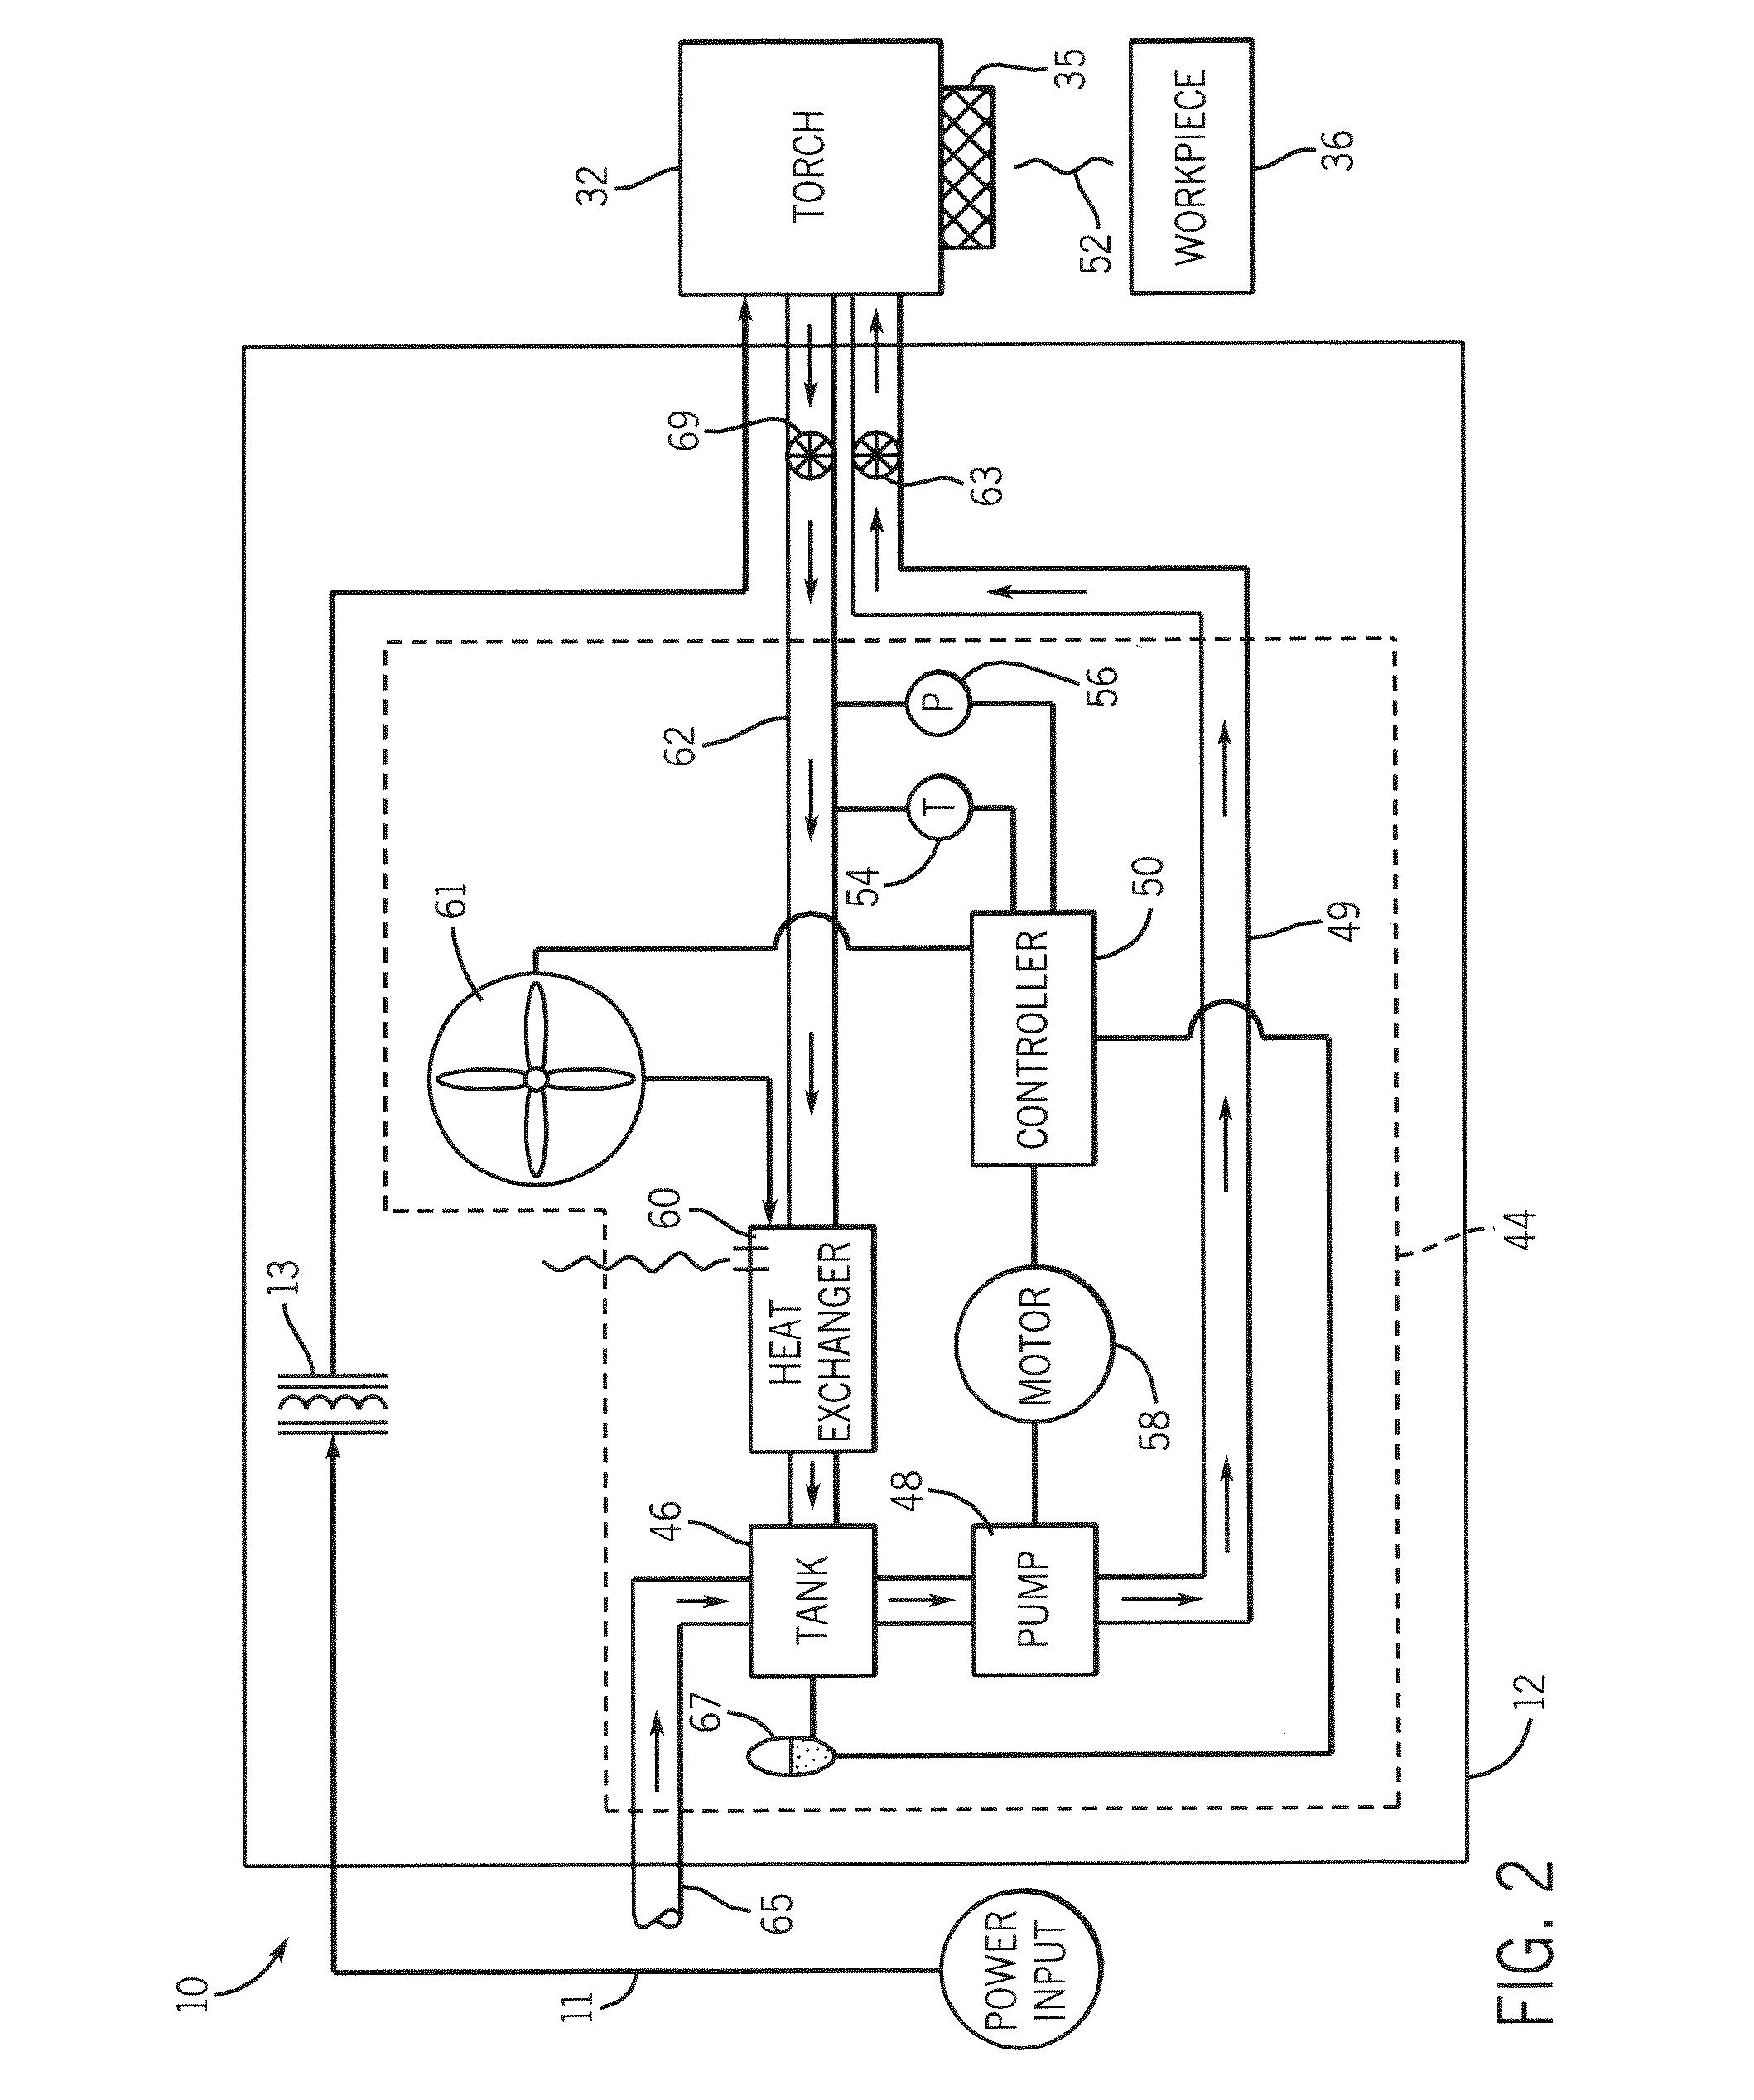 Method and apparatus to adaptively cool a welding-type system